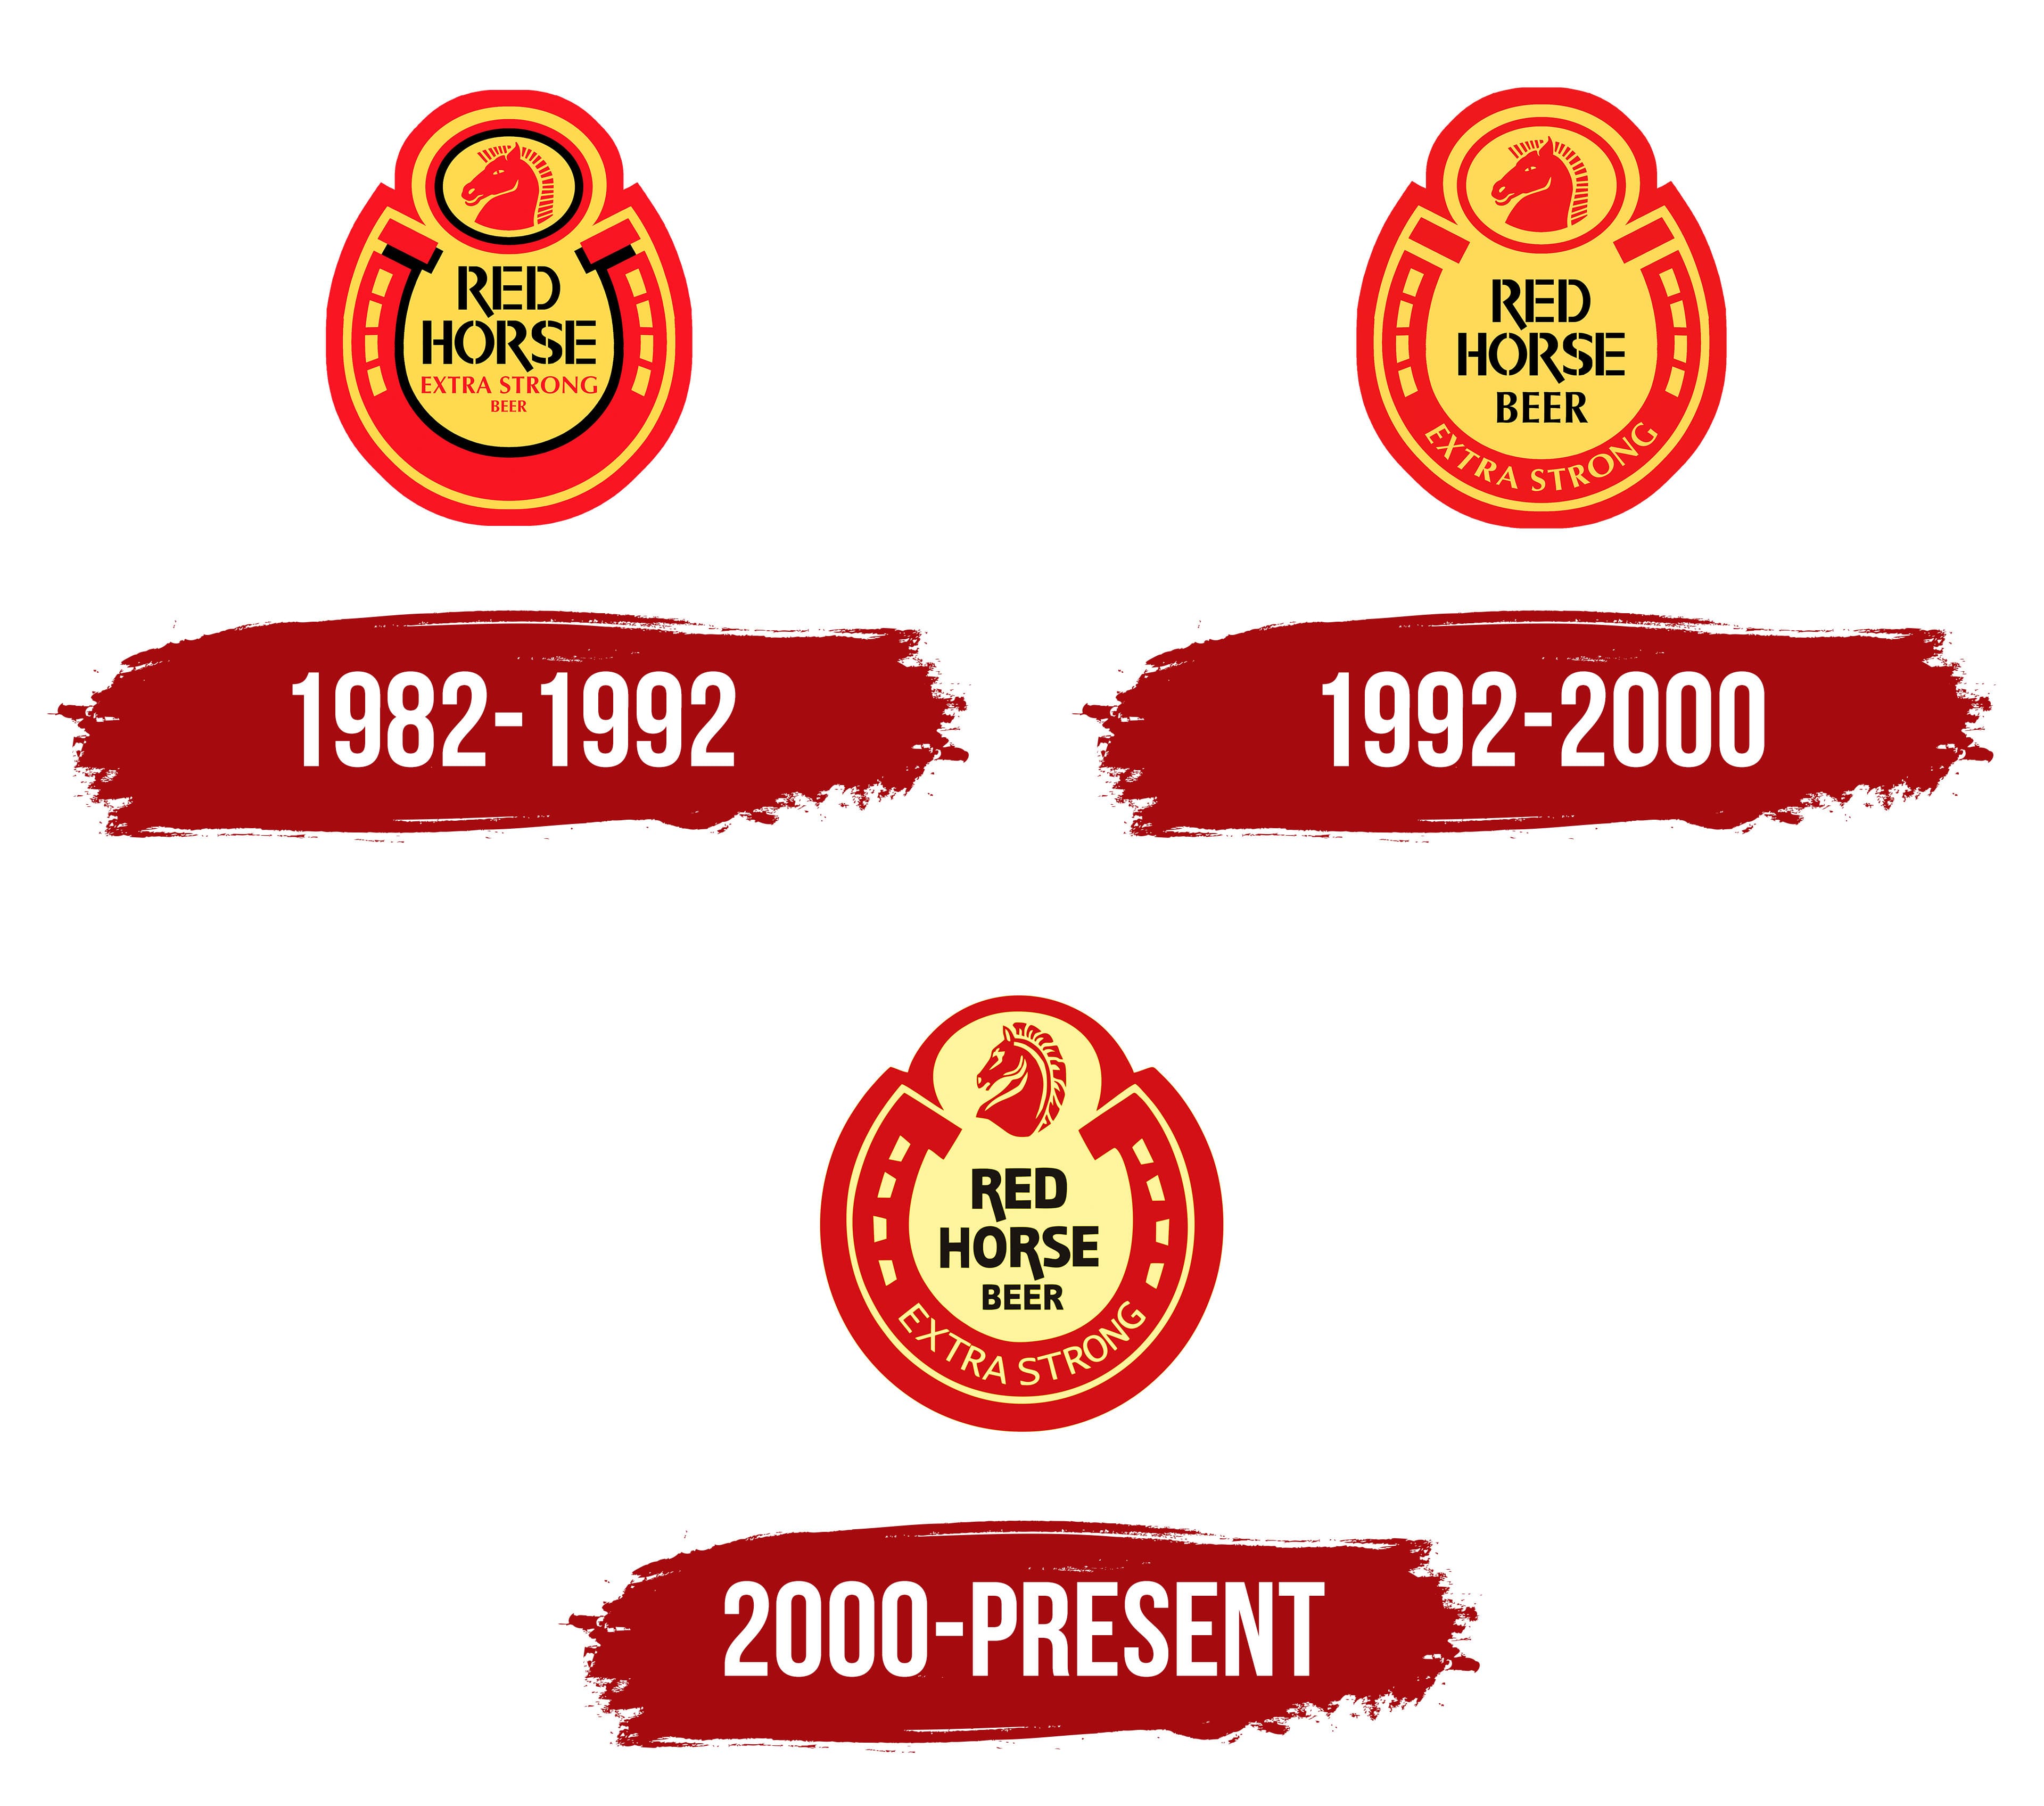 Red Horse Extra Strong symbol, history, brand